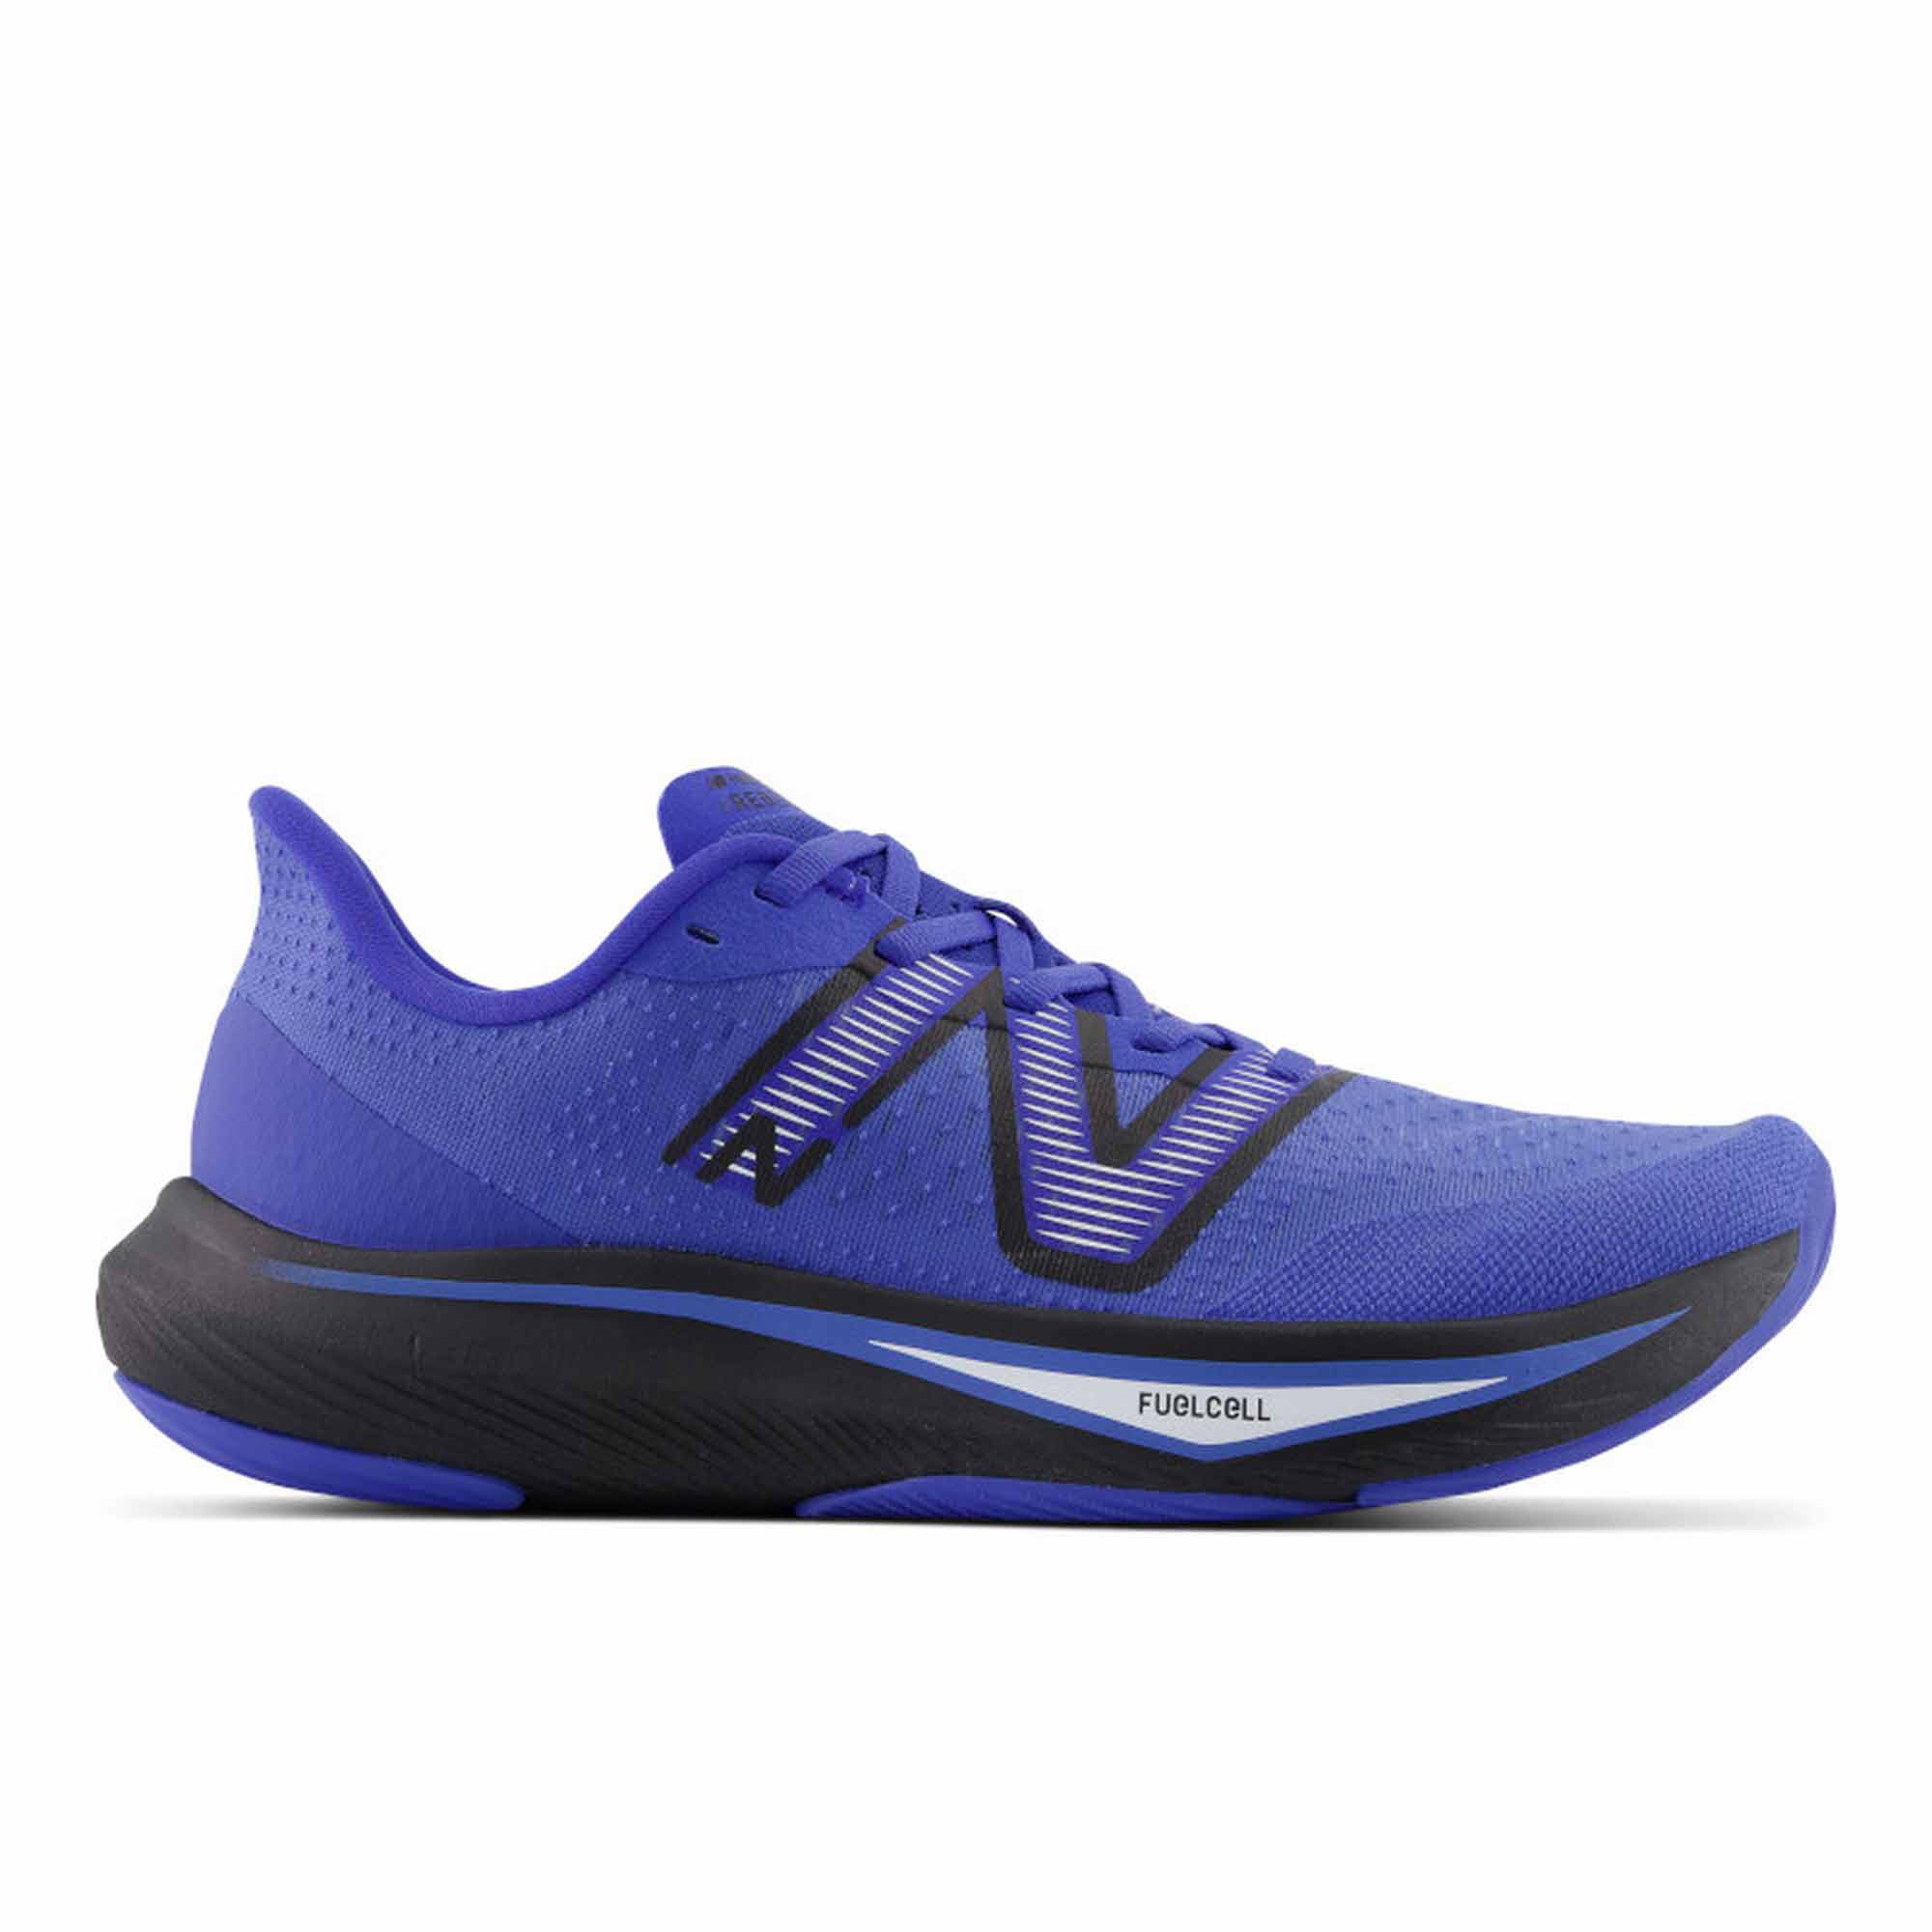 New Balance Mens FuelCell Rebel v3 D Running Shoes